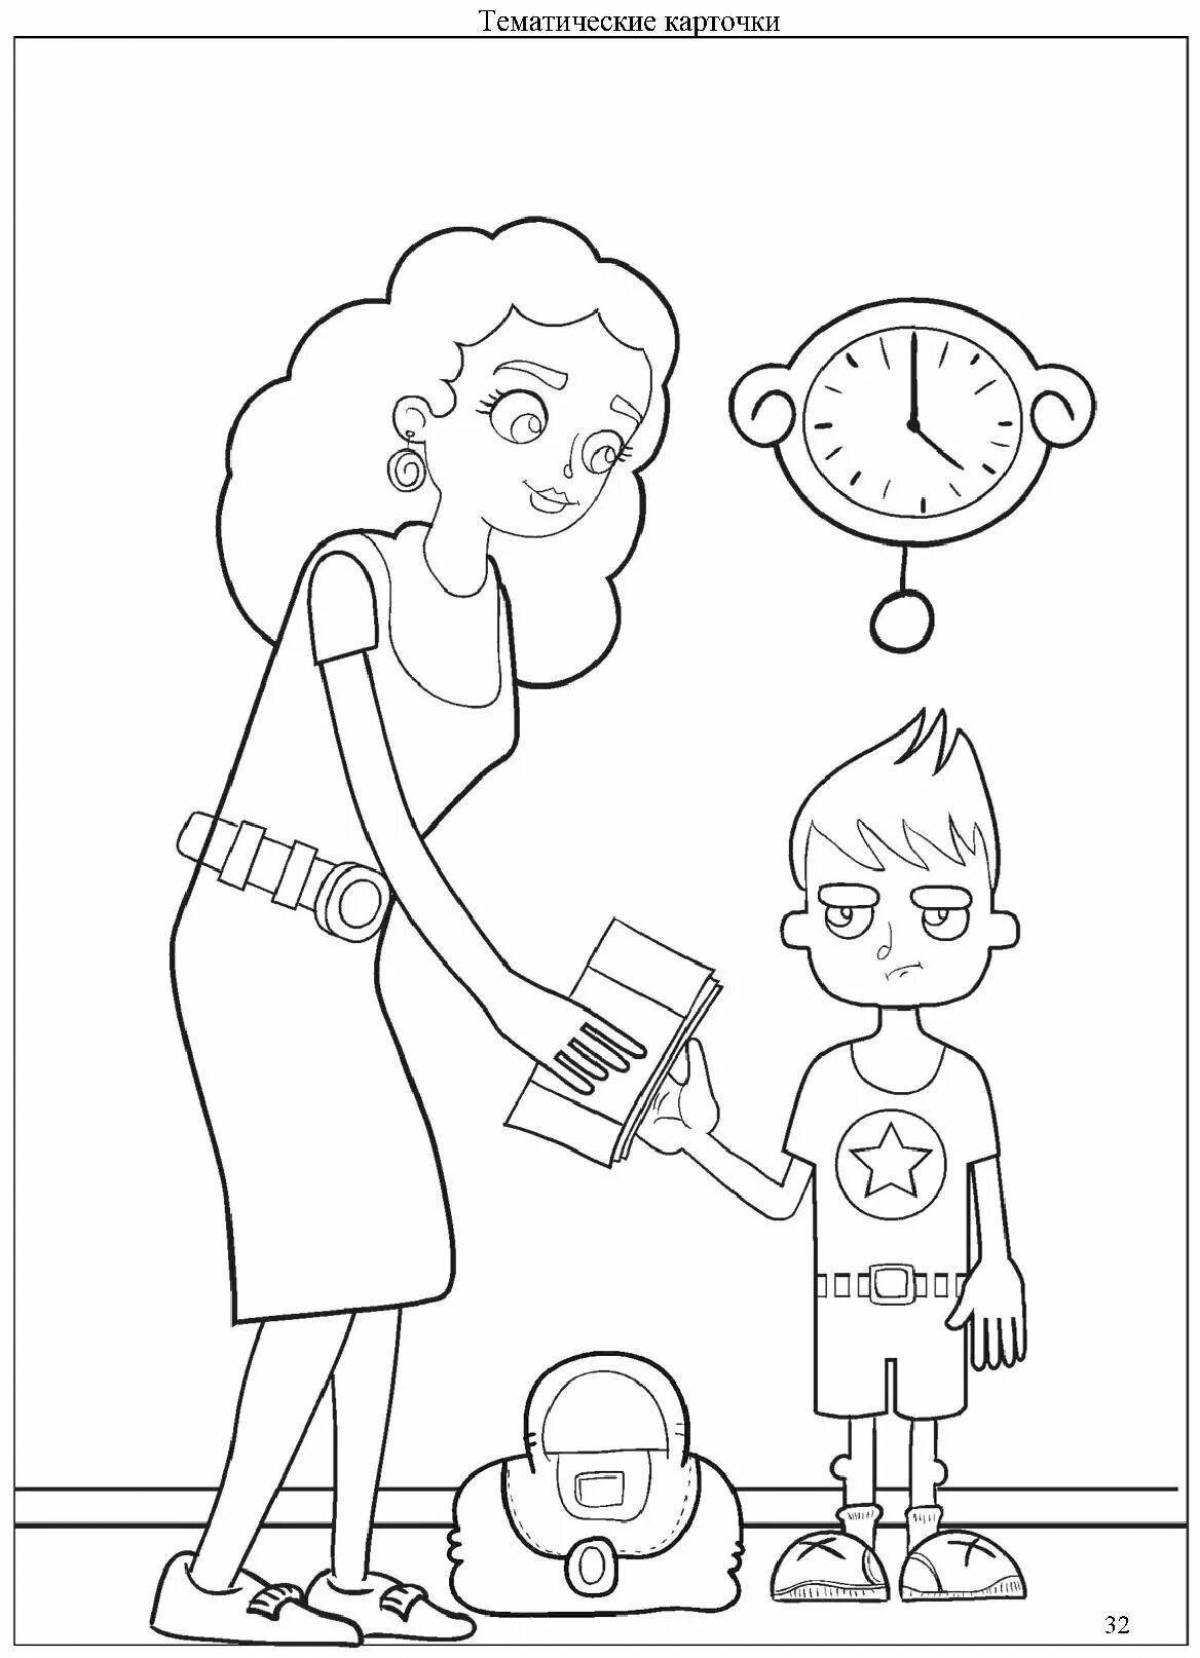 Fun financial literacy coloring book for elementary school students